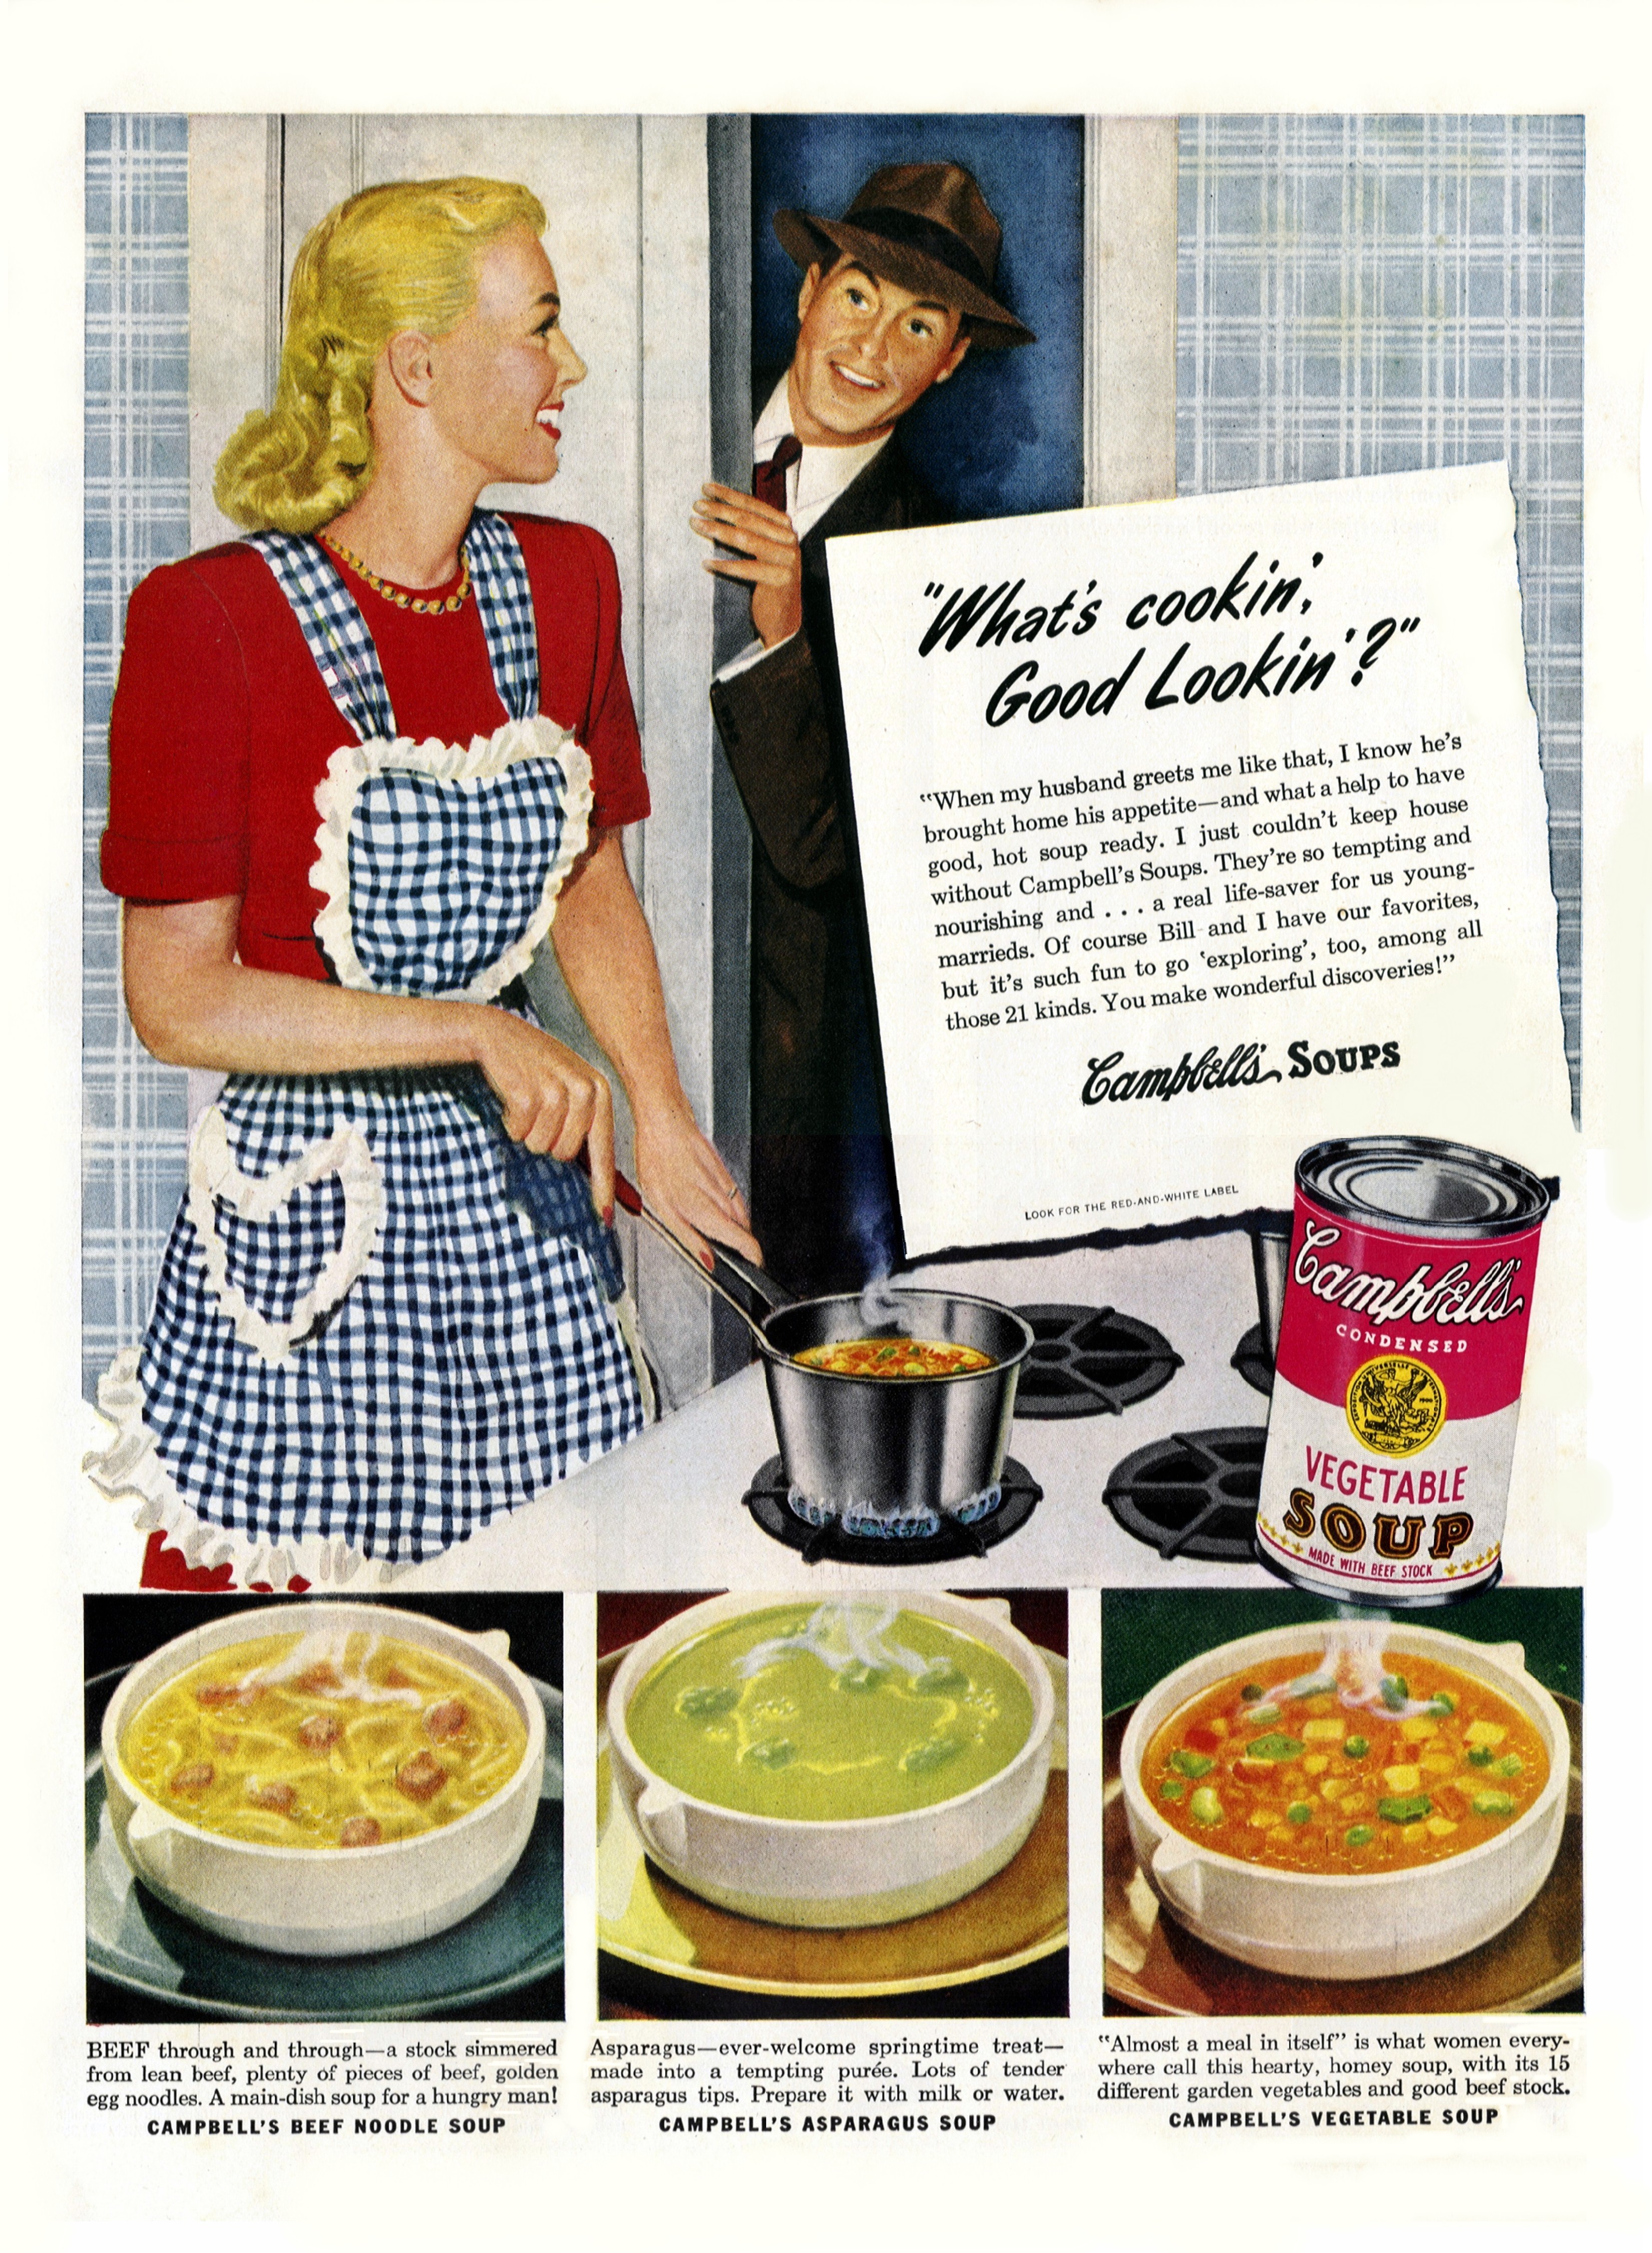 Campbell's Soup - published in Better Homes and Gardens - October 1947